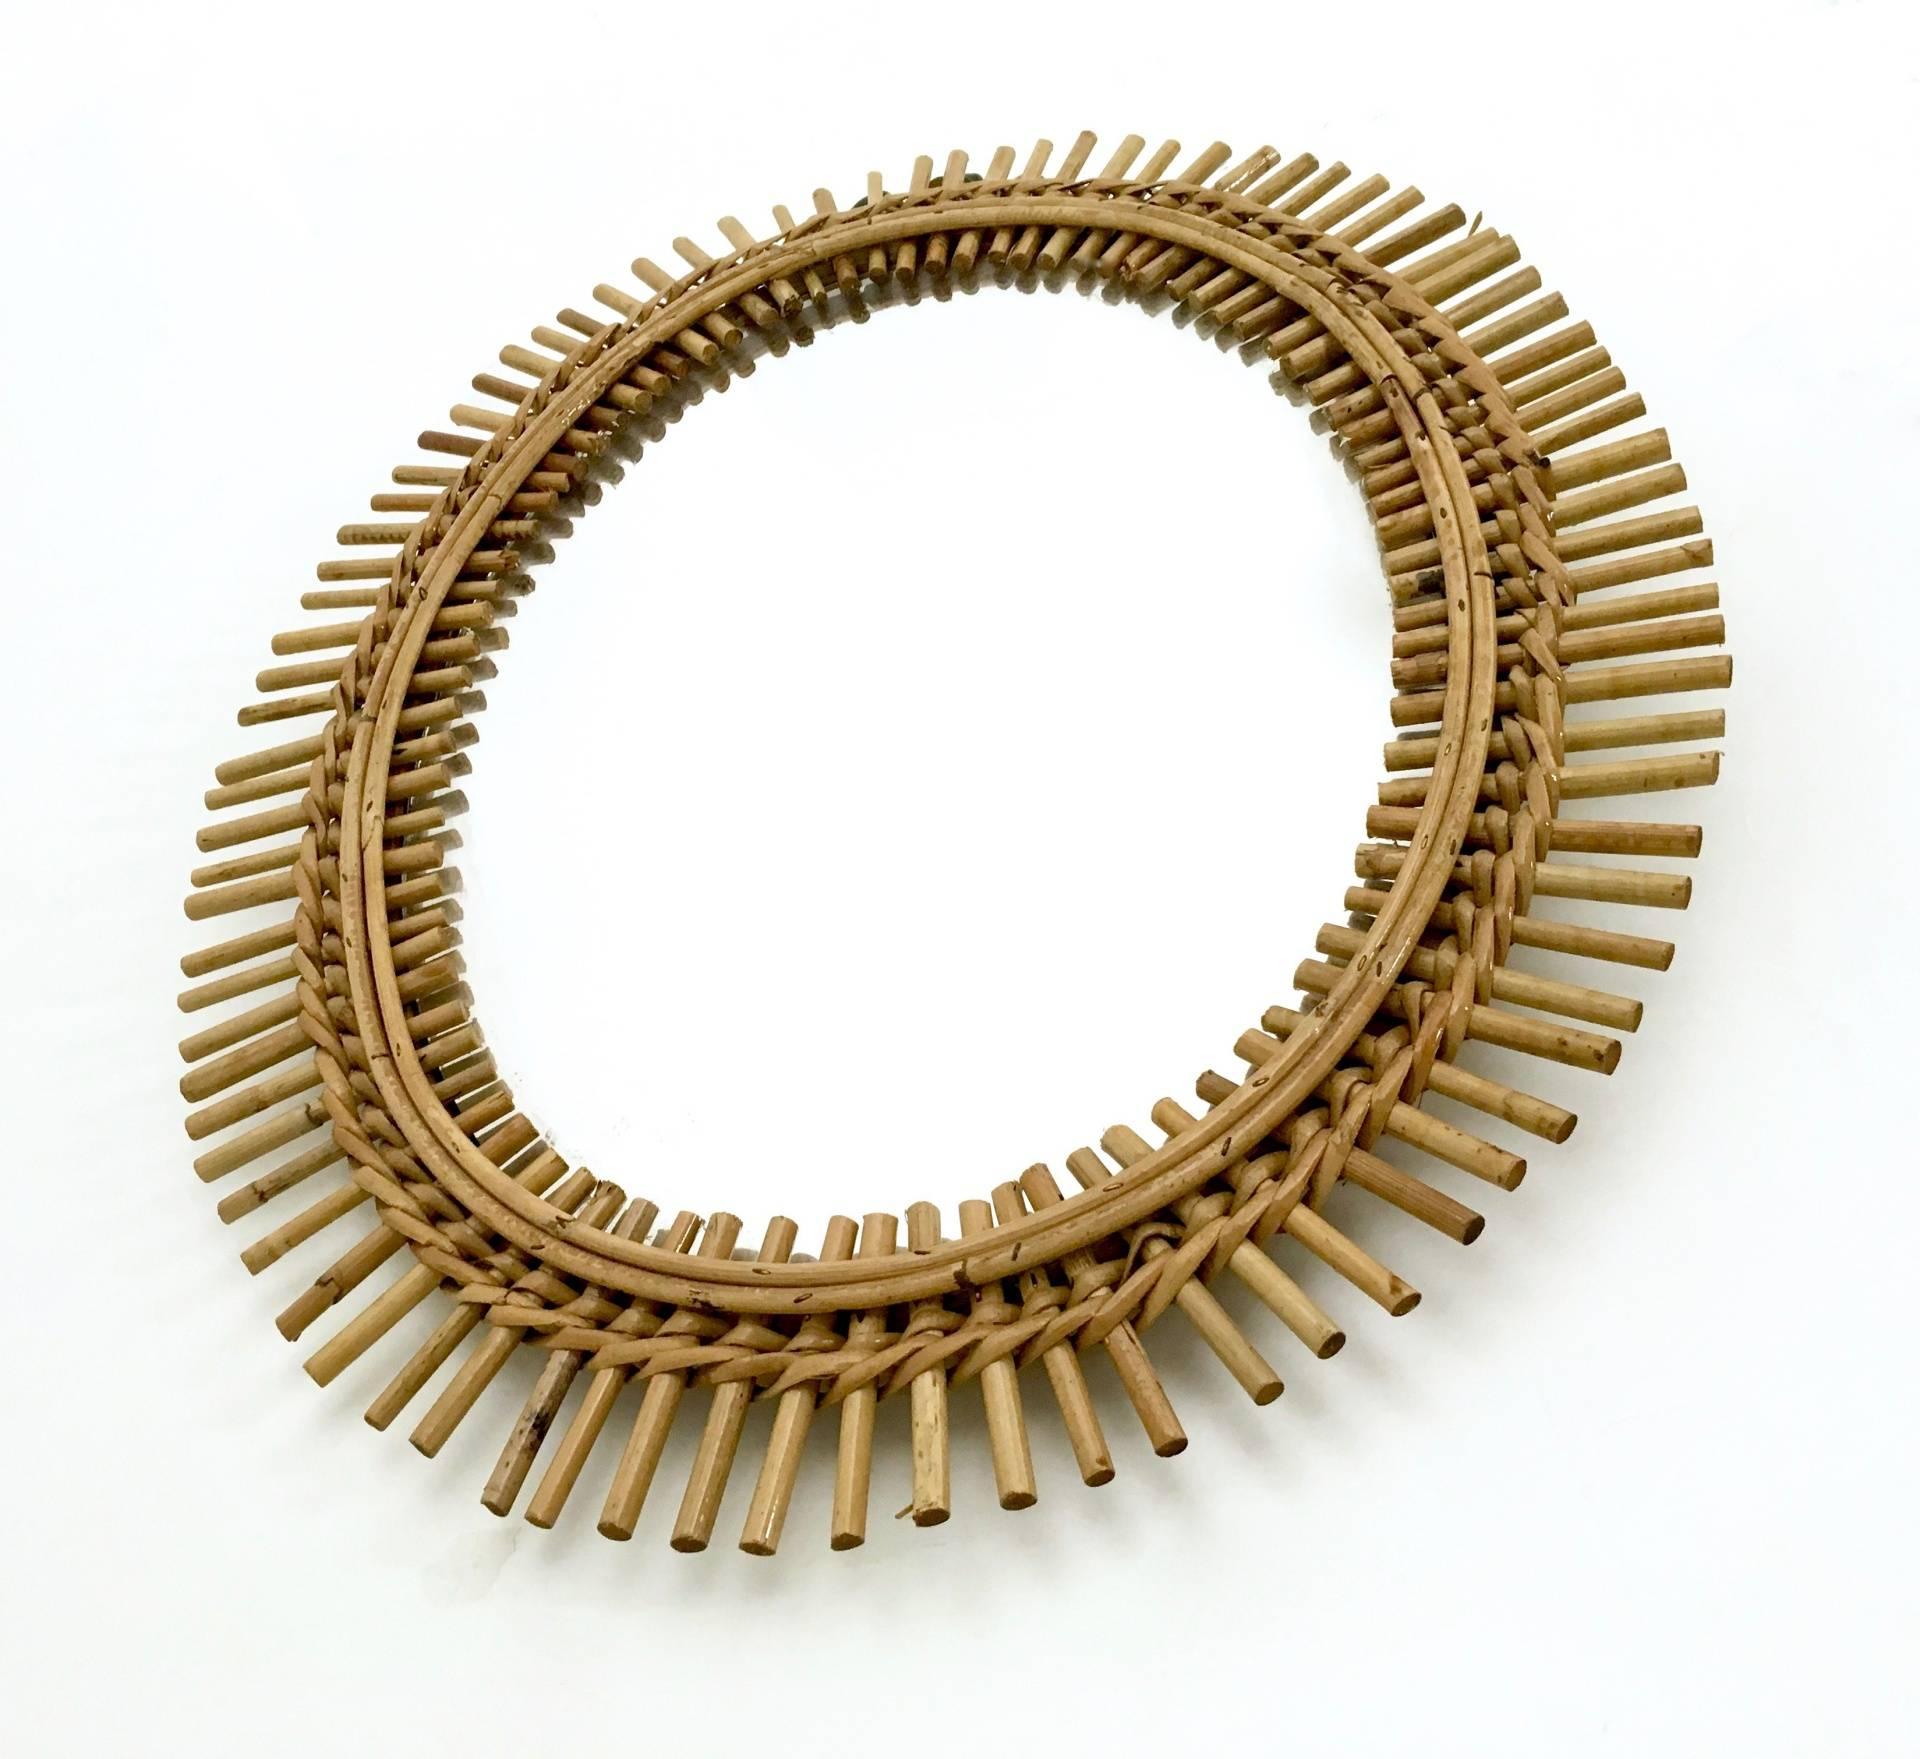 Mid-20th Century Oval Wall Mirror in the Style of Franco Albini with a Wicker Frame, Italy, 1950s